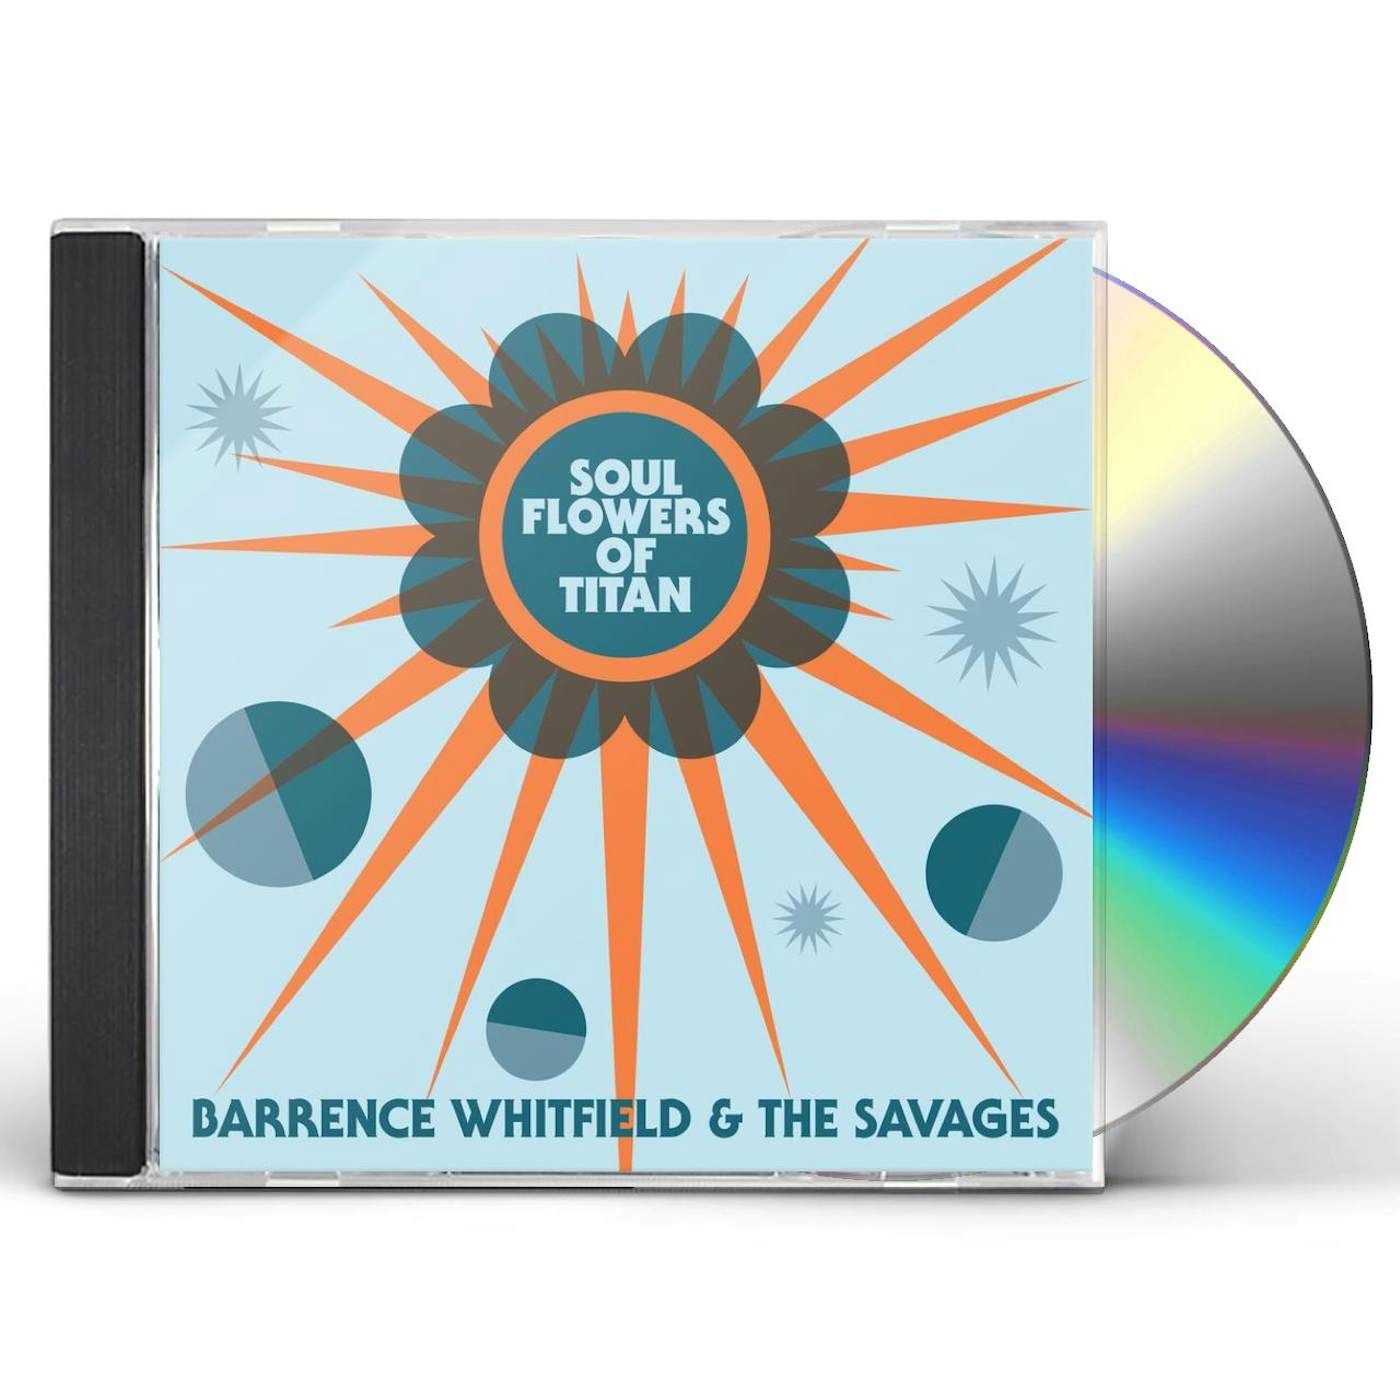 Barrence Whitfield & The Savages SOUL FLOWERS OF TITAN CD